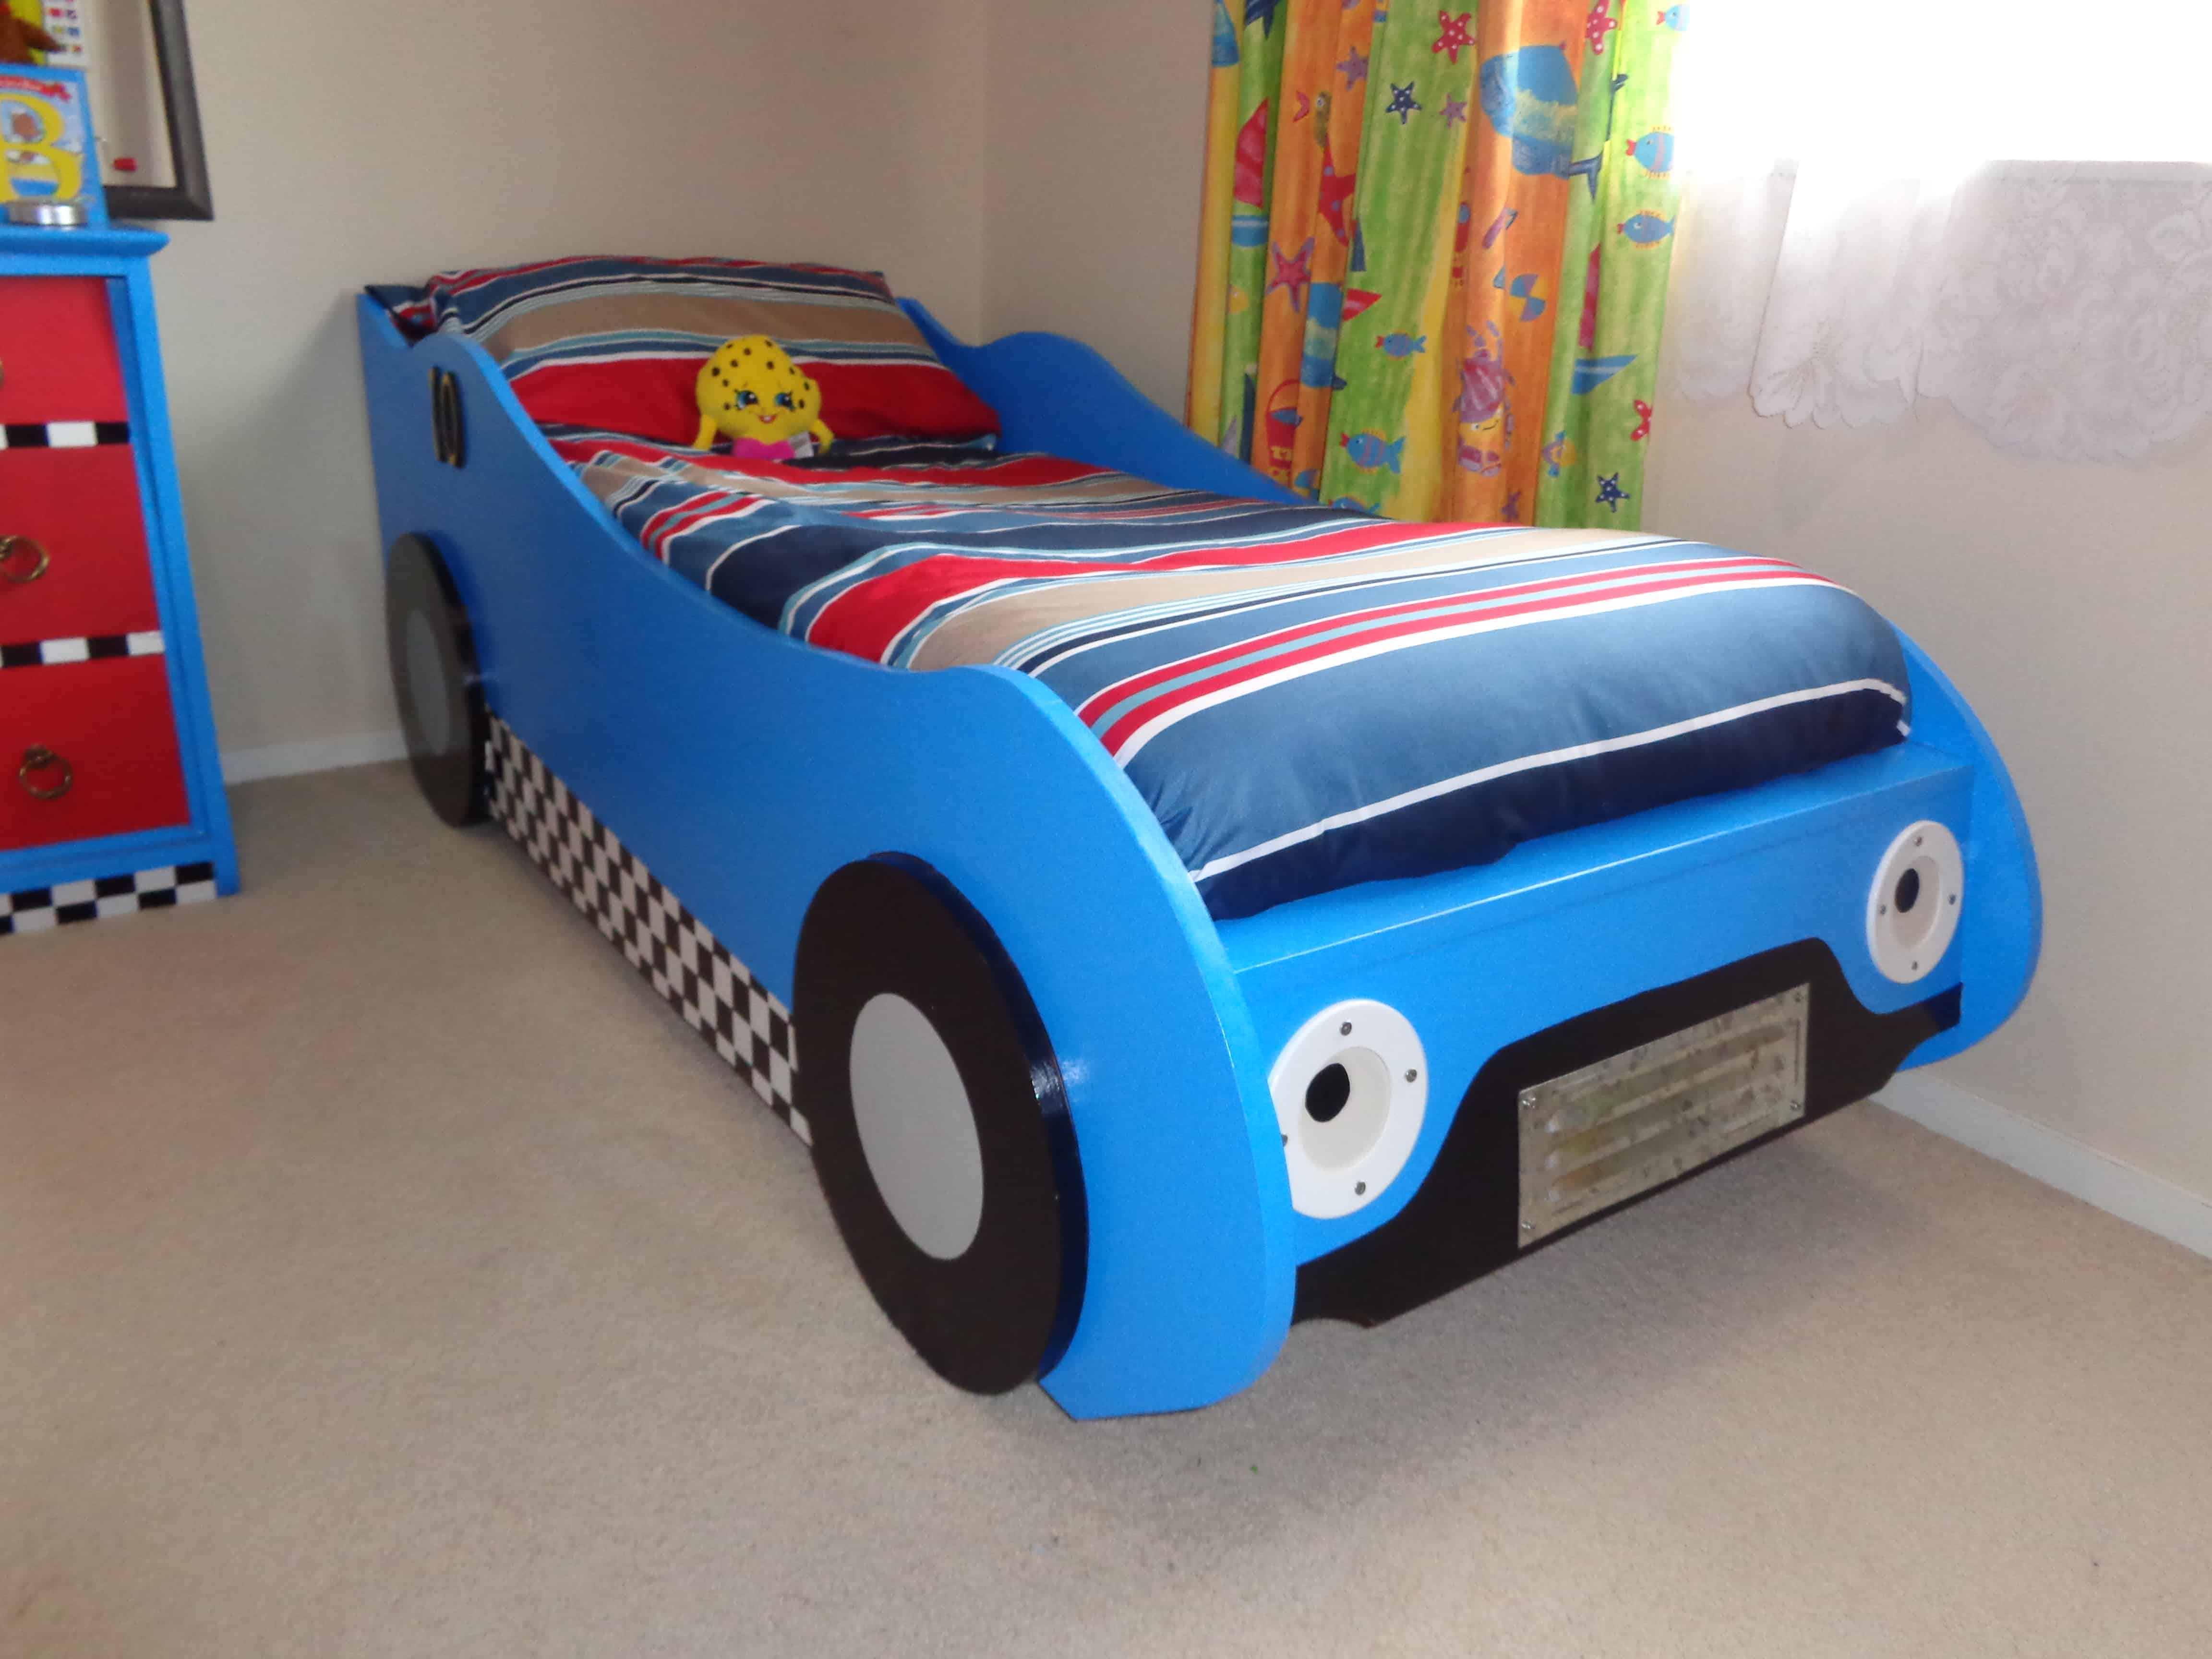 Kids' racing car bed | BuildEazy